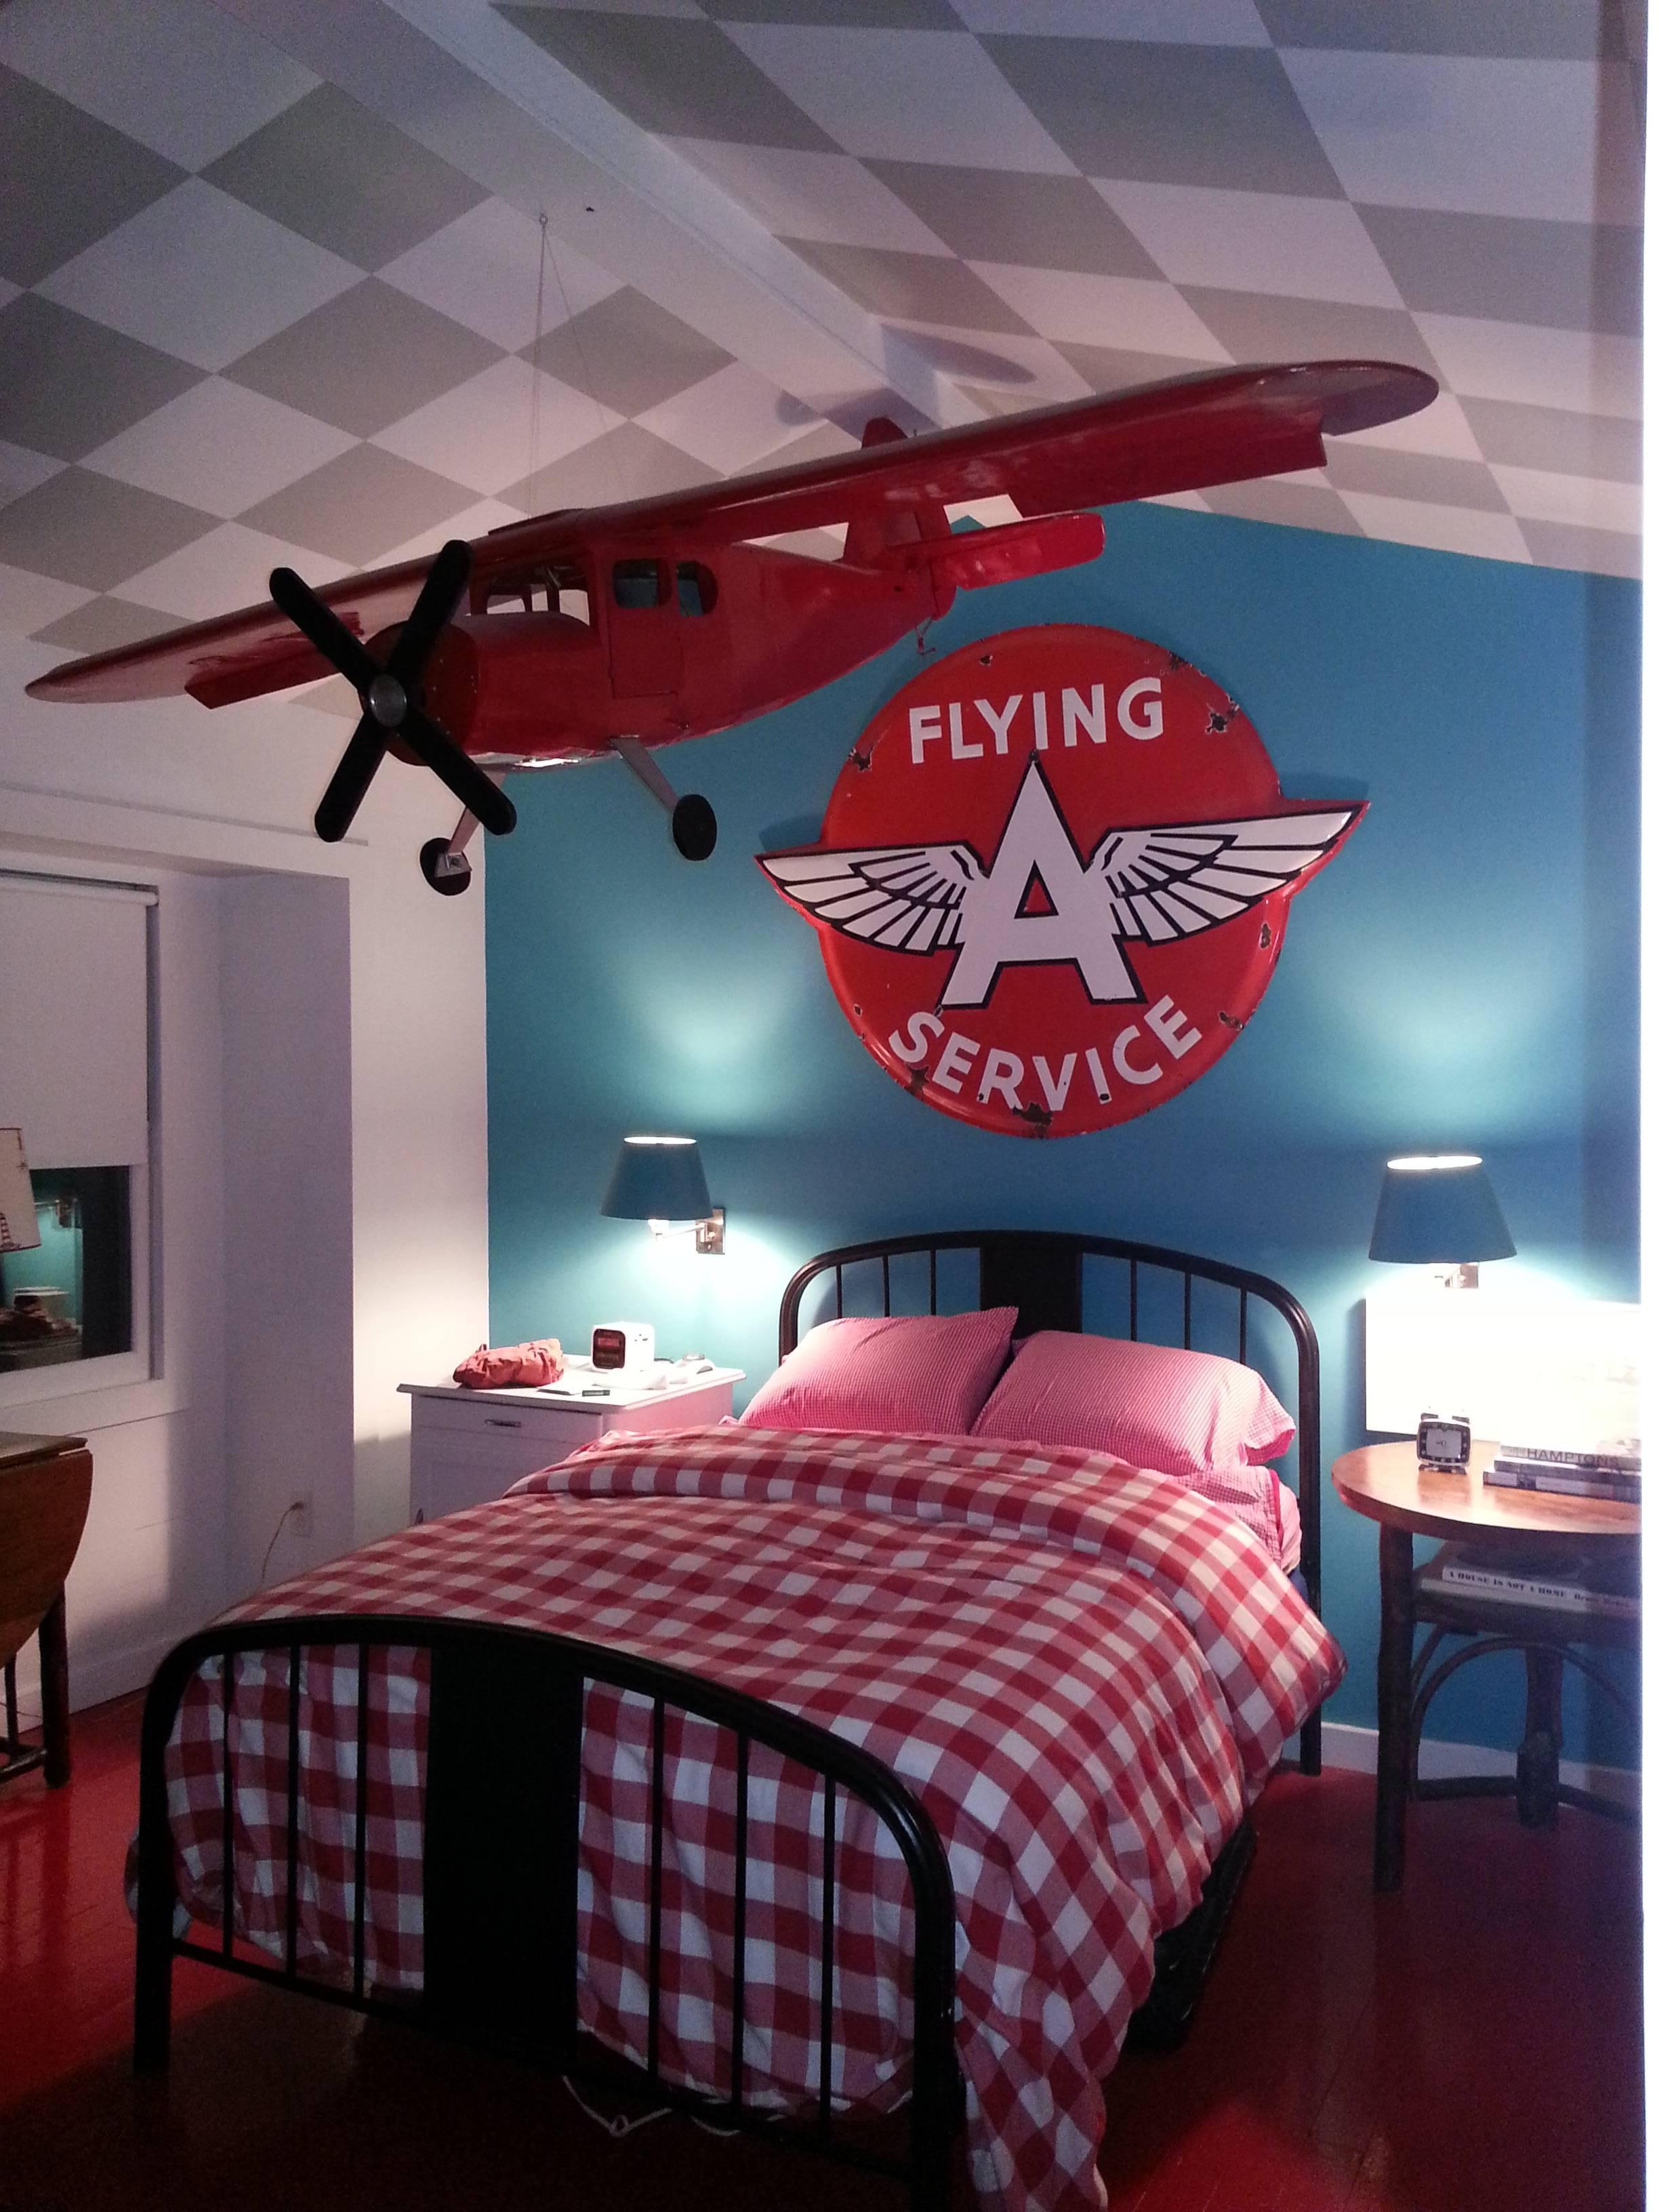 Beautiful large-scale model airplane in a bright red lacquer.